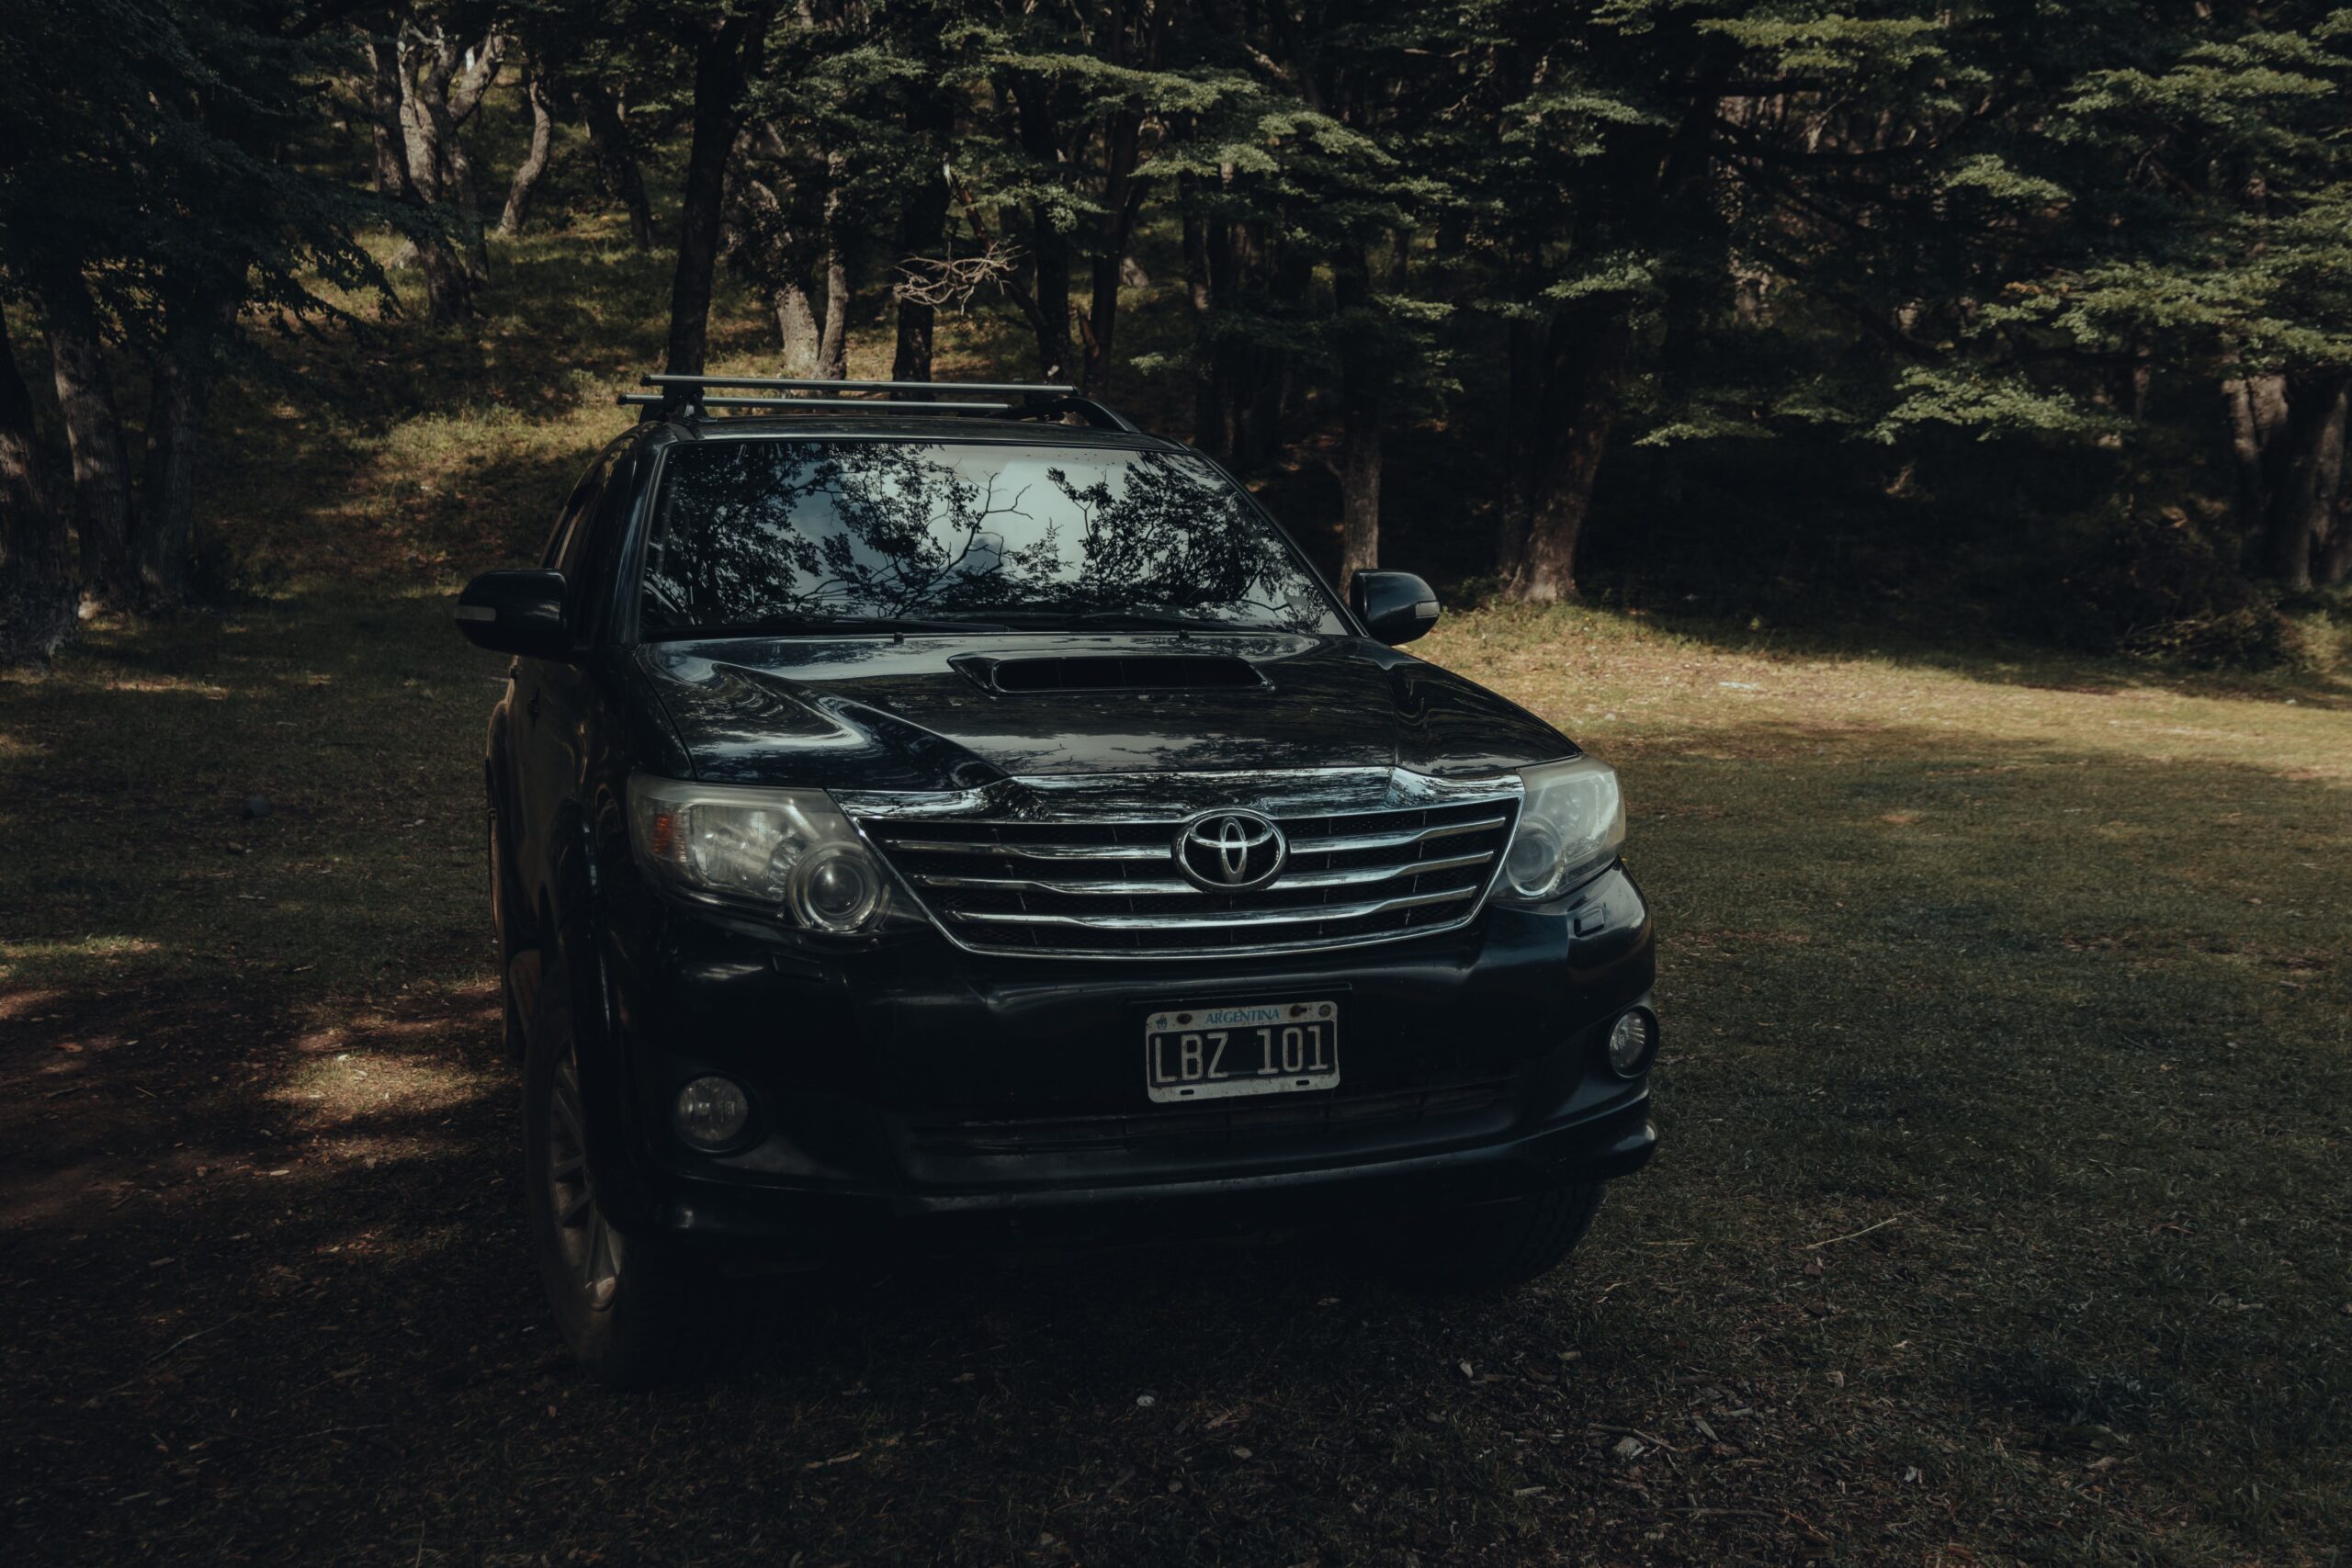 New 2020 Toyota Fortuner SUV Review